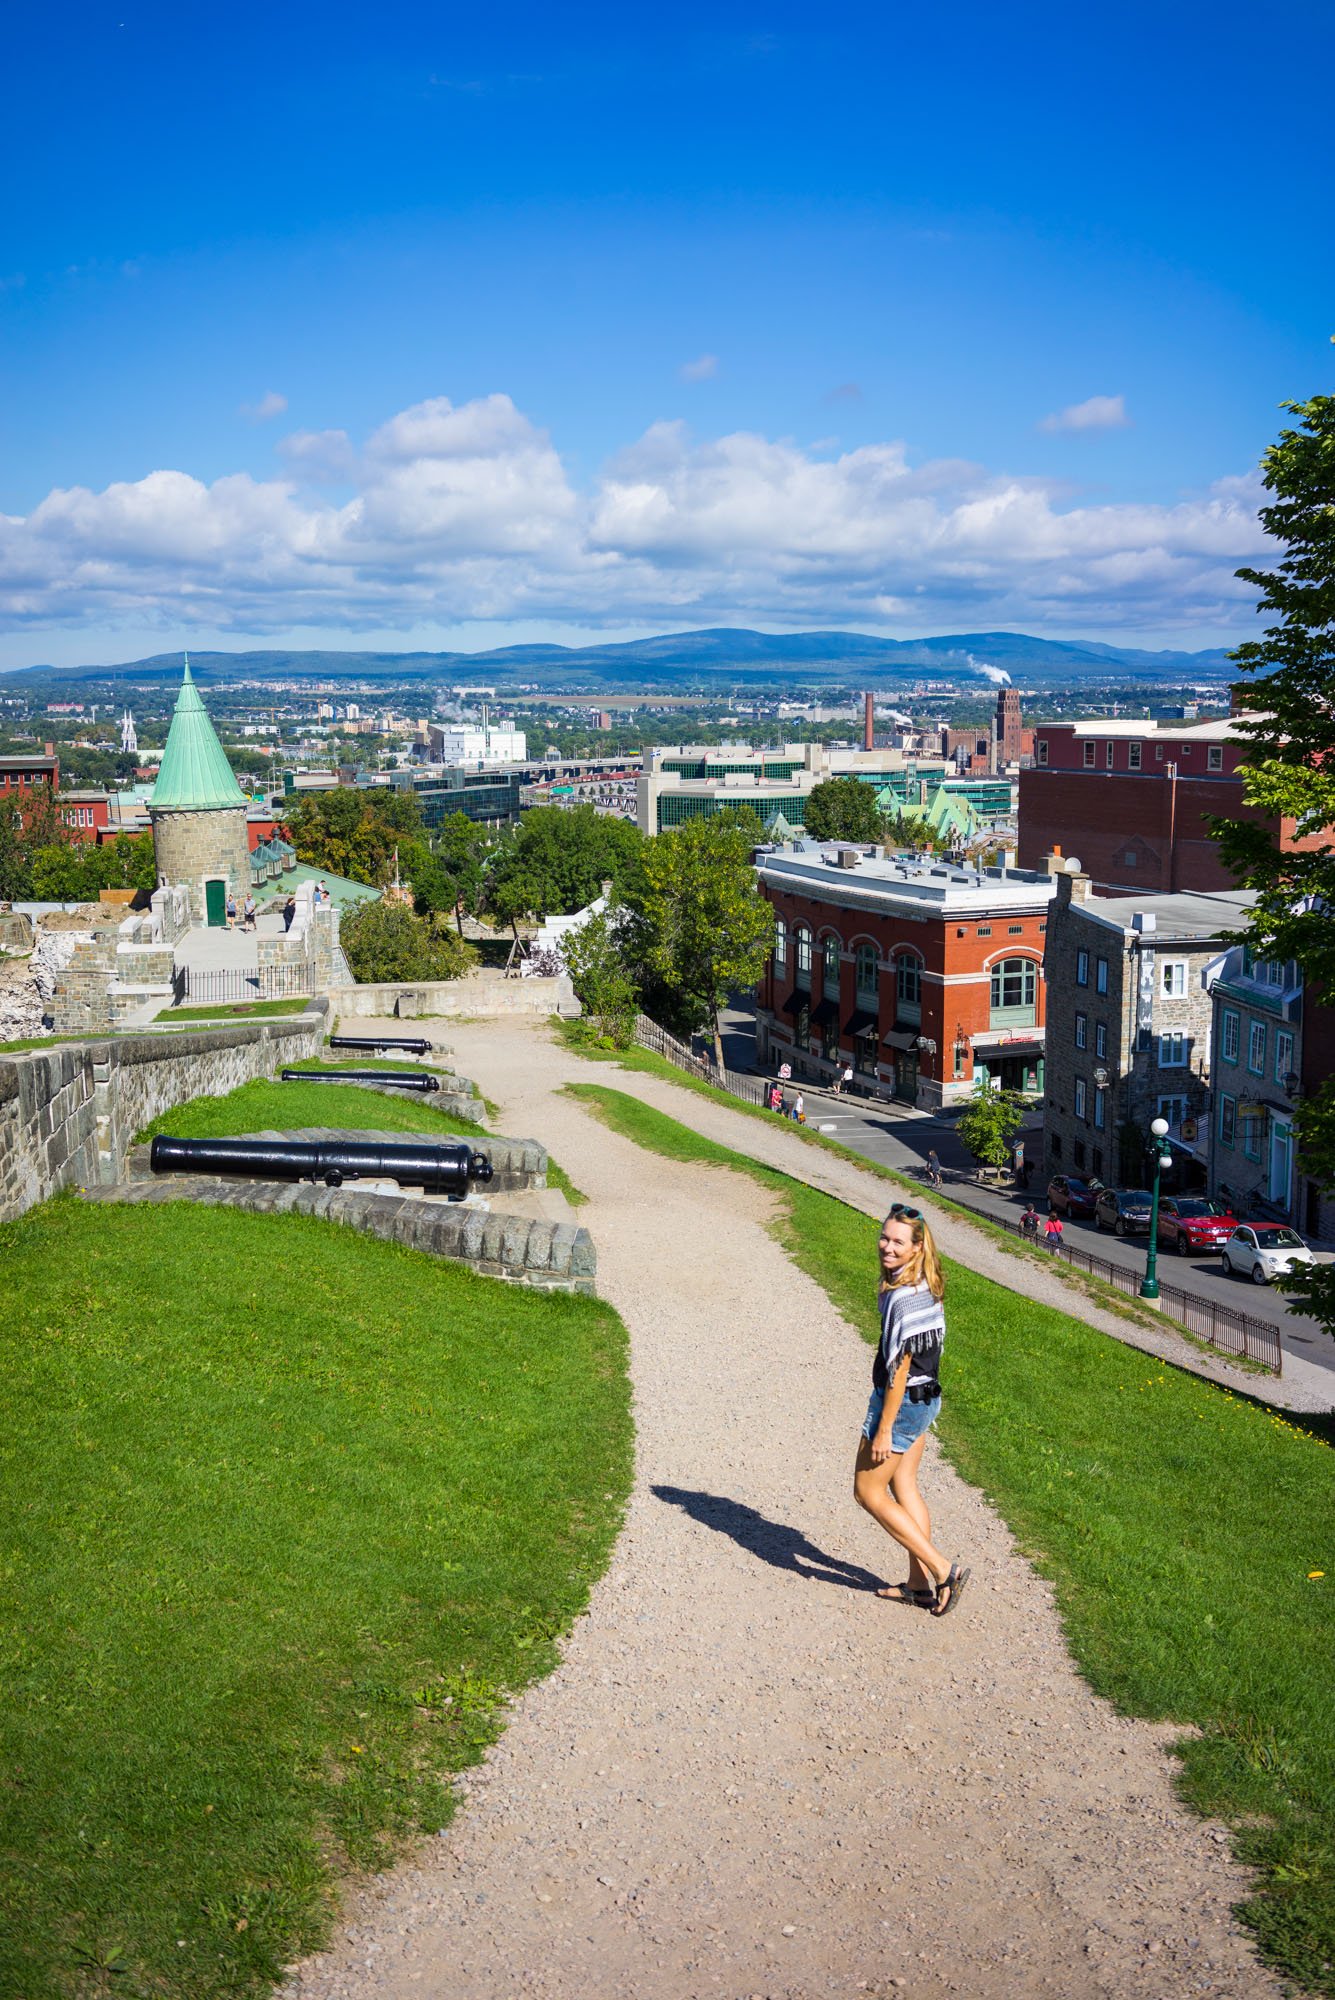  Walking along the walls of Old Town Quebec 